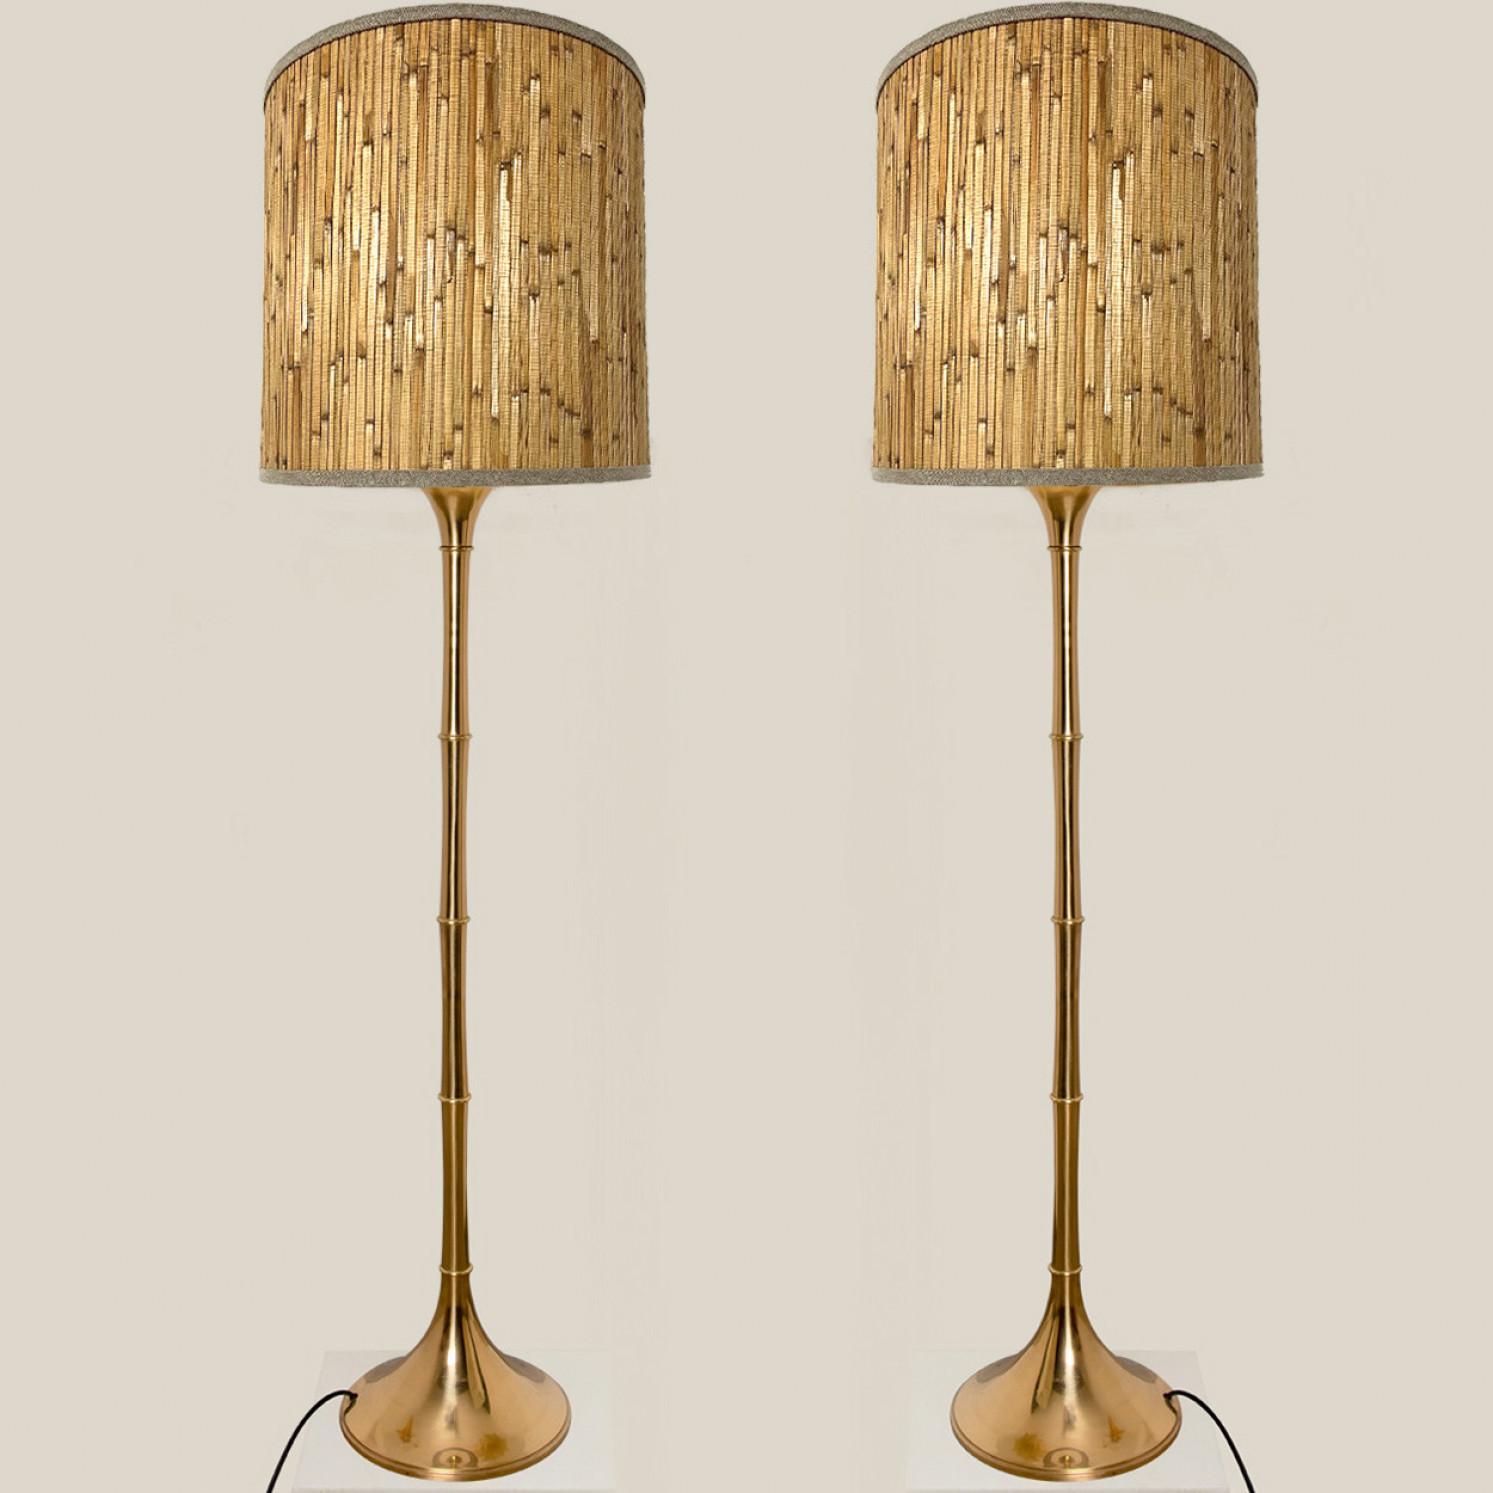 Pair of floor Lamps Gold Brass and Wood by Ingo Maurer, Europe, Germany, 1968 For Sale 8